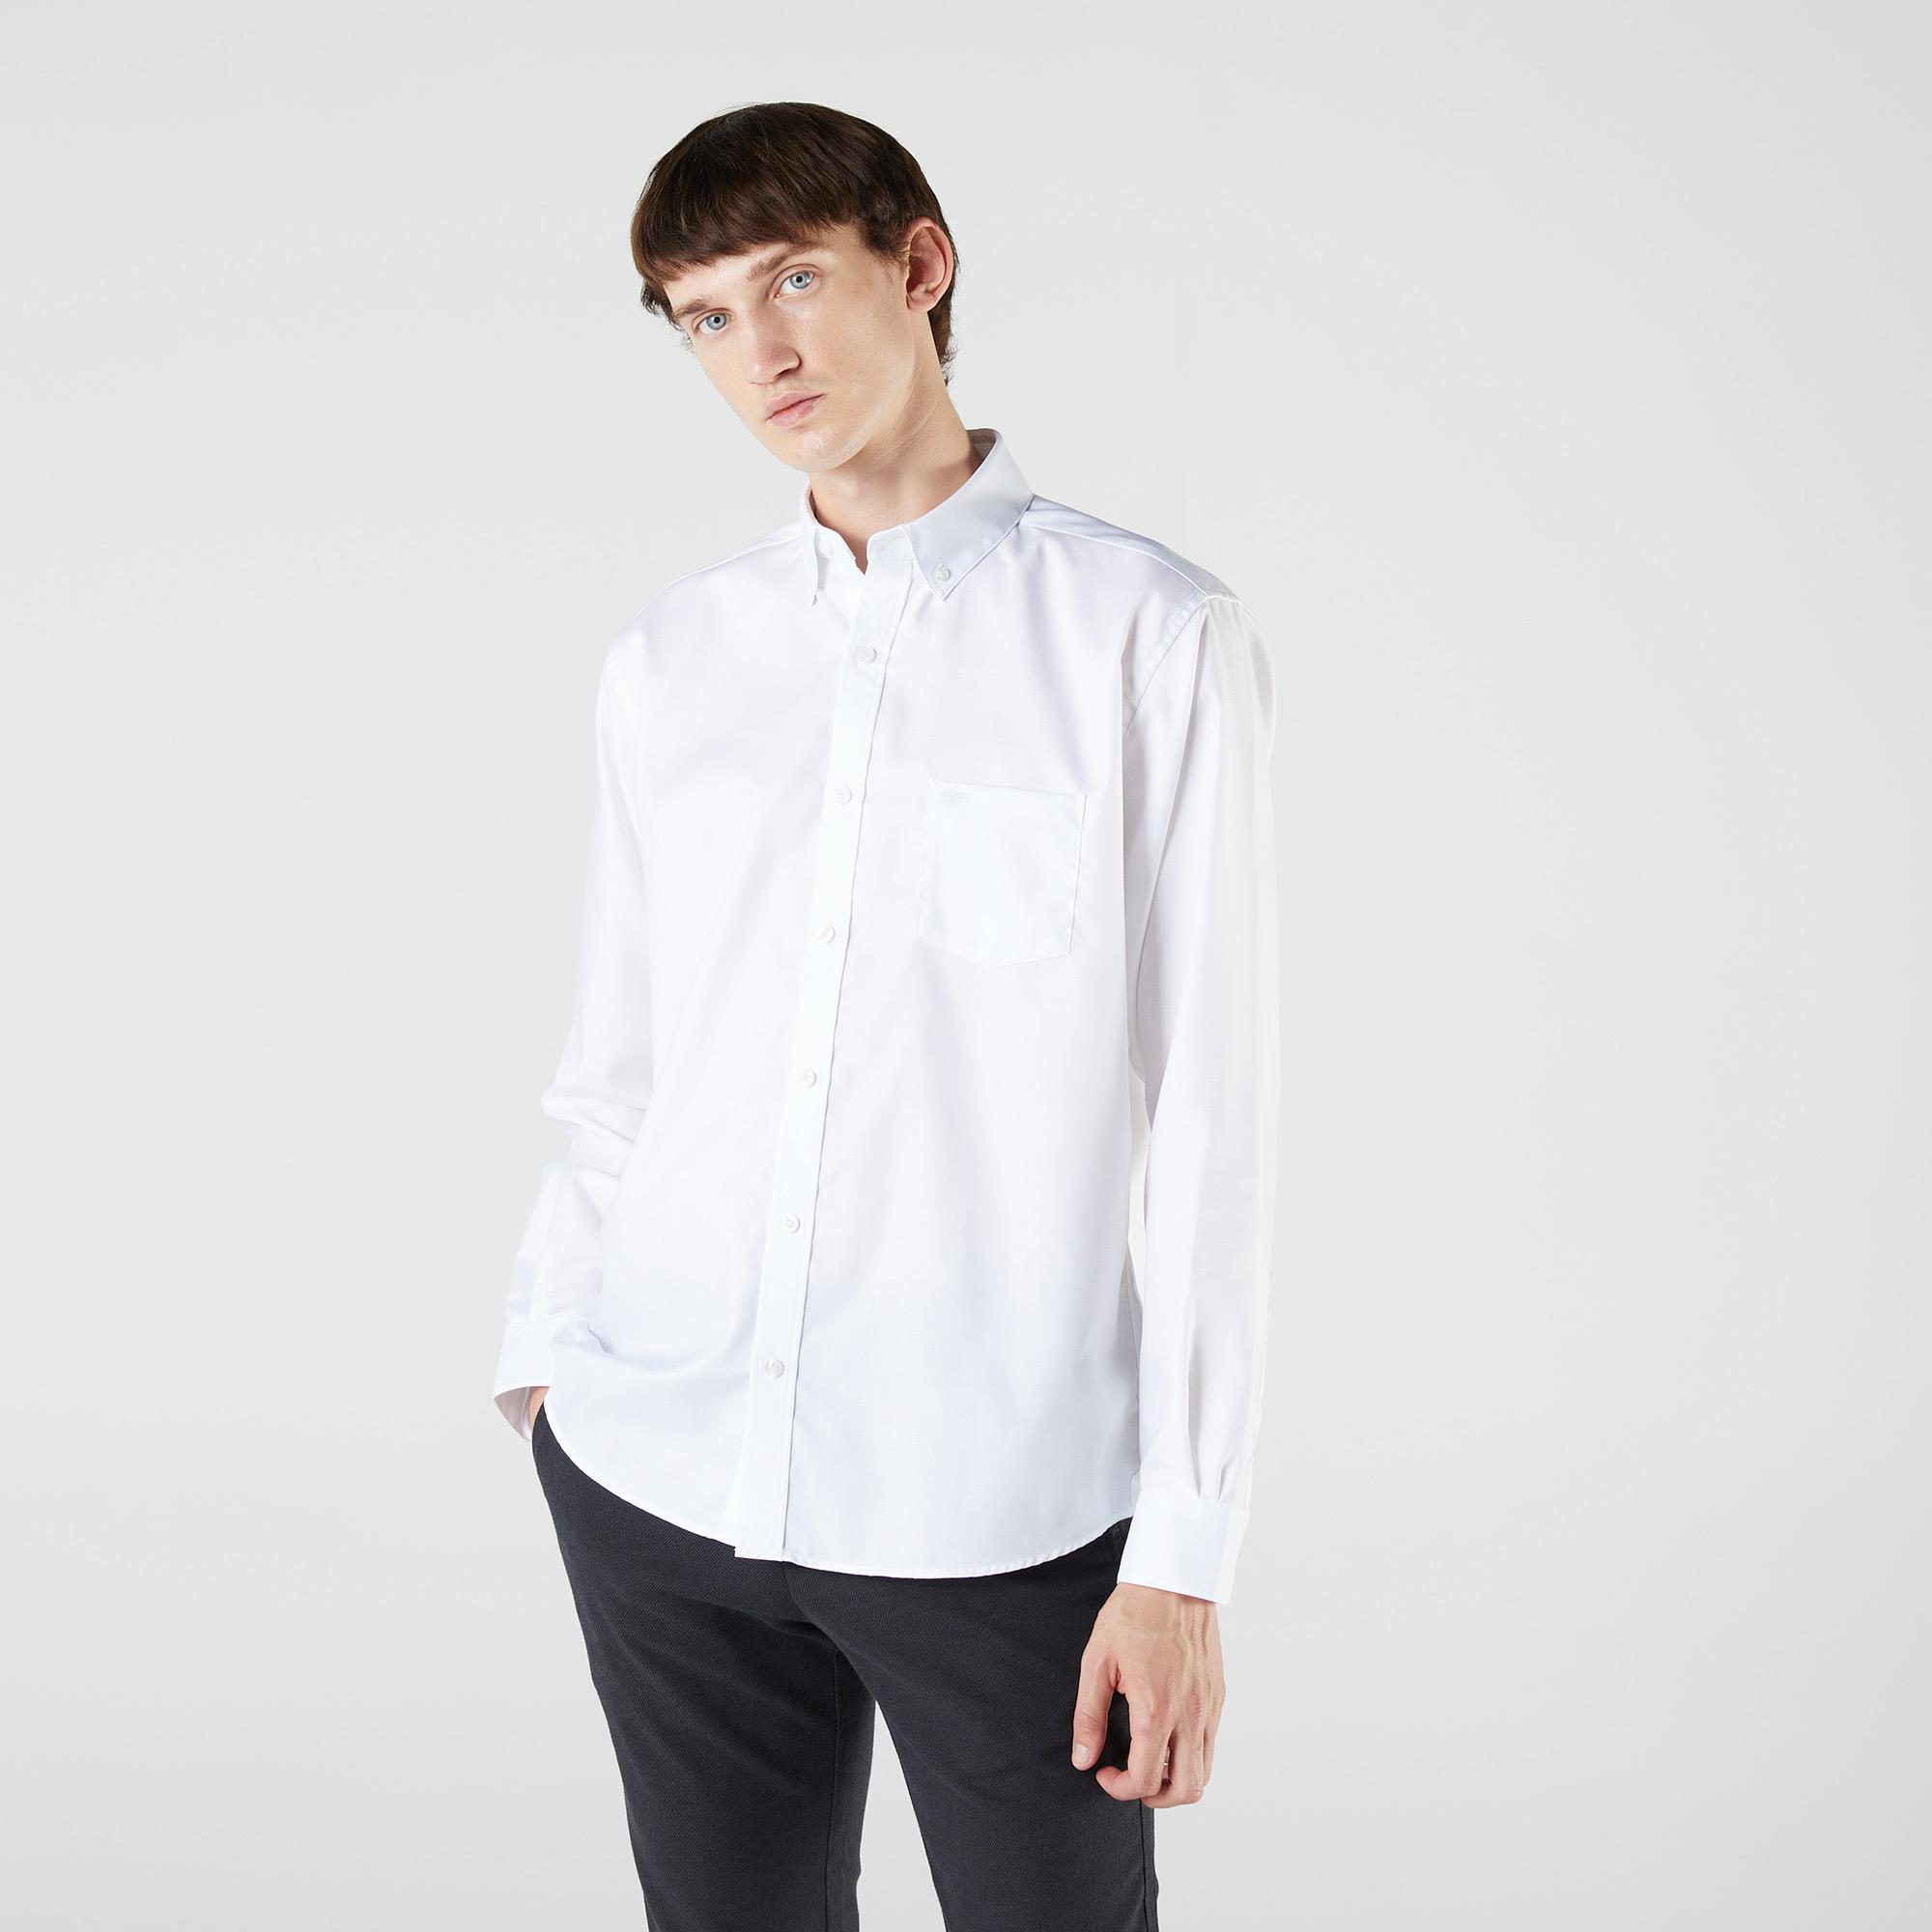 Hobart expand It's cheap Lacoste Men's cotton Shirt Regular Fit from a fine peak CH9623 | Lacoste